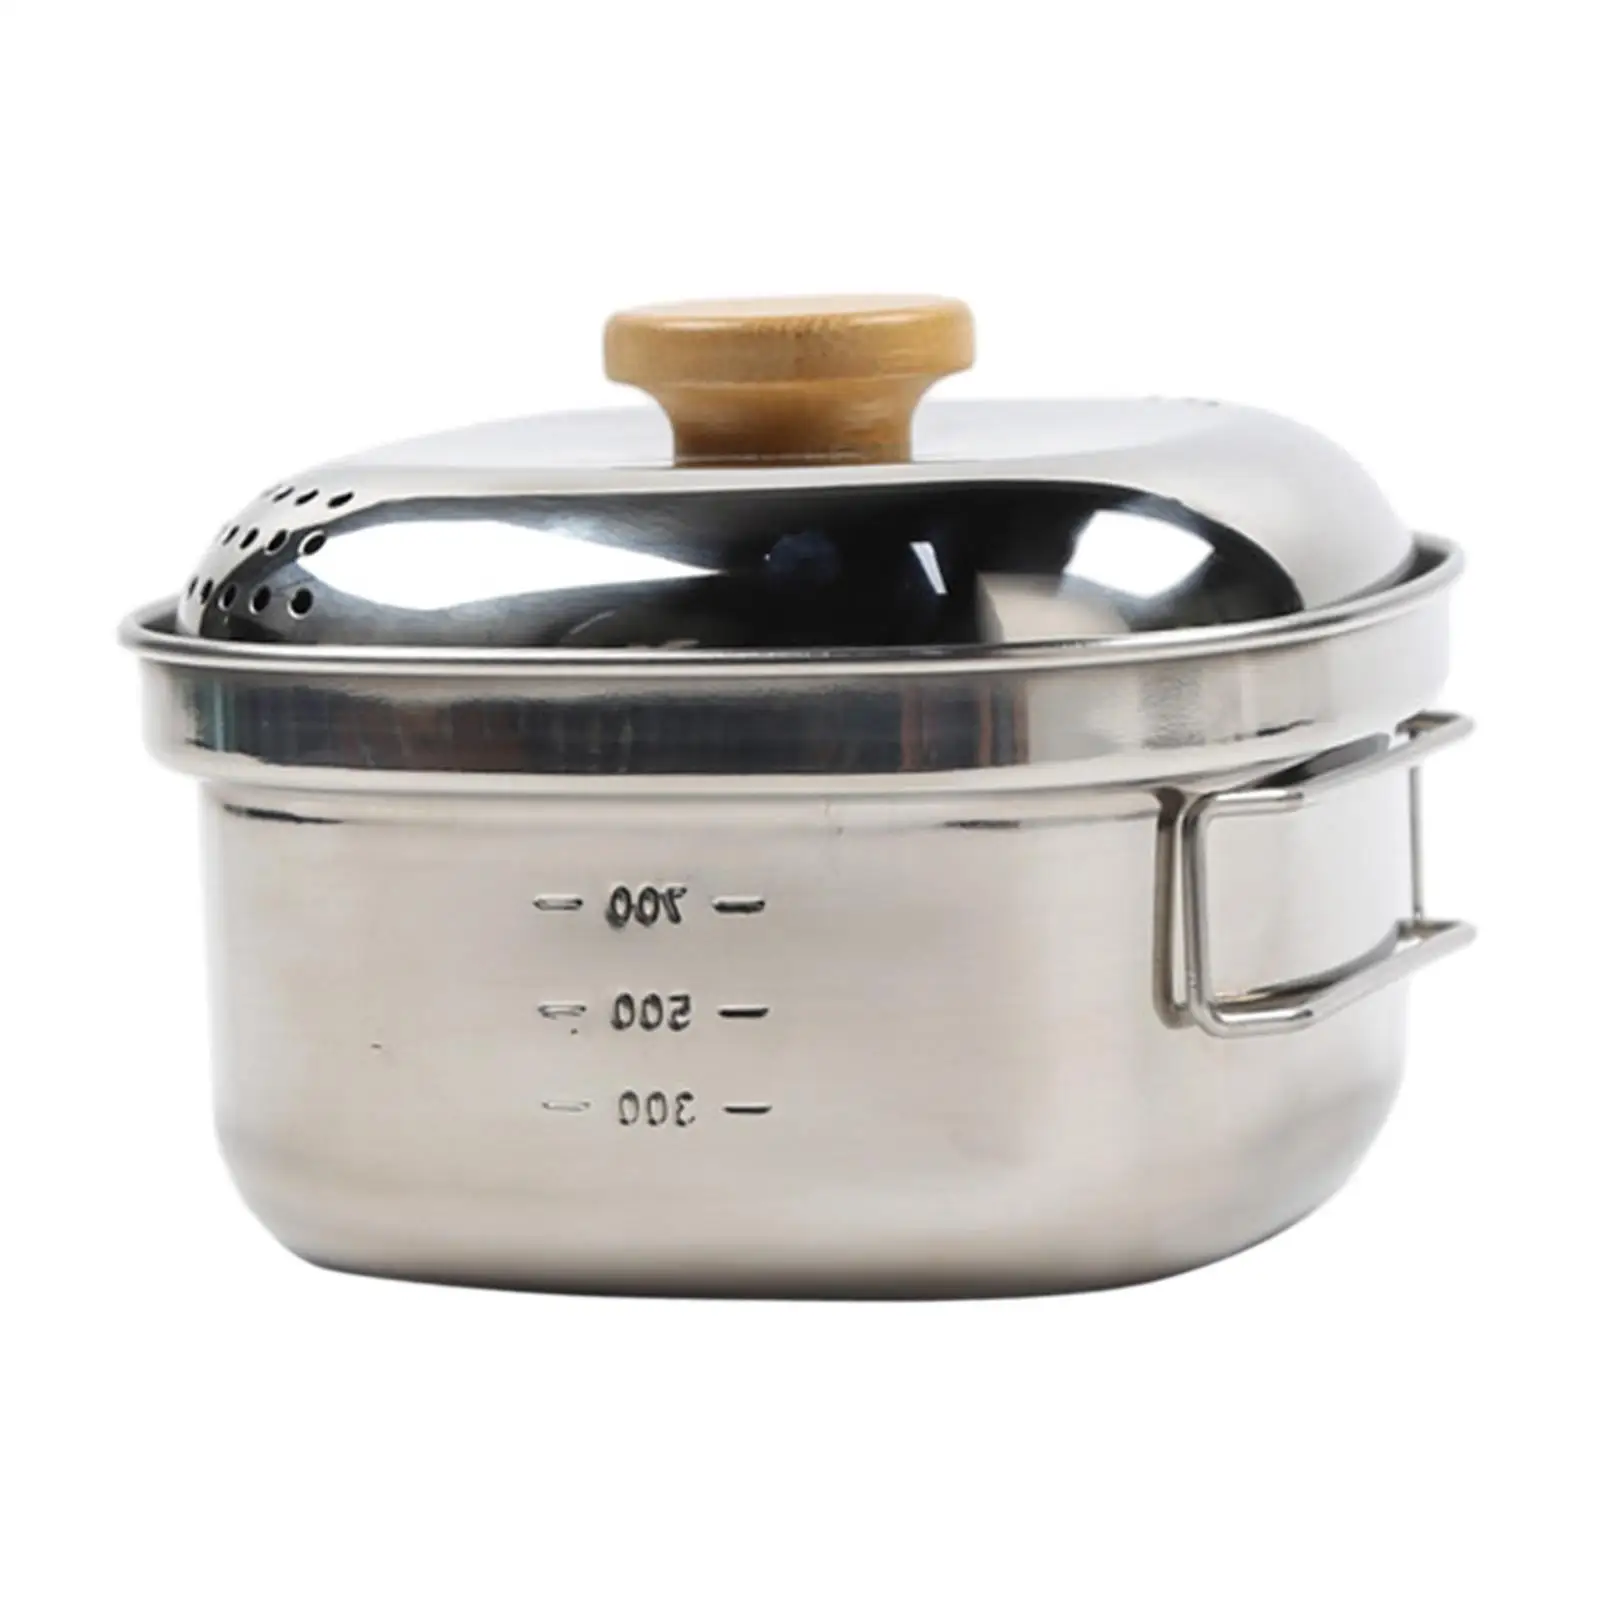 Camping Cook Pot with Lid Portable Cookware Cookware for Outdoor Picnic